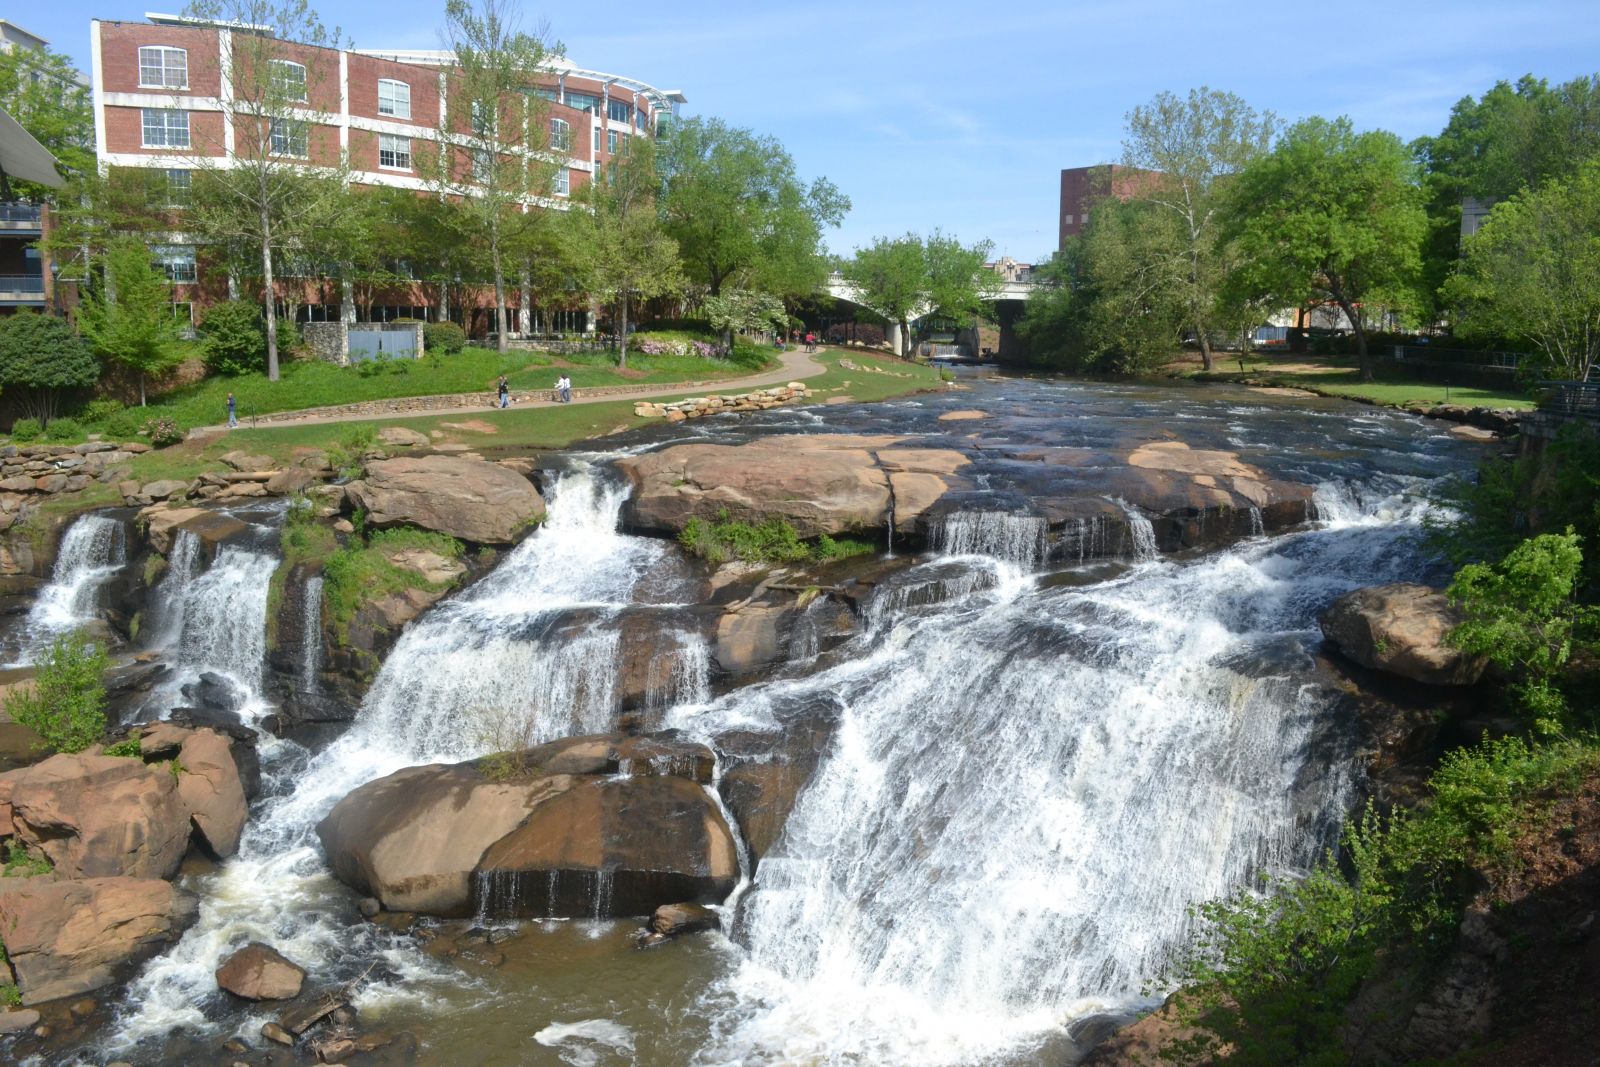 In 2017, the first year Greenville was featured on Conde Nast Traveler's Best Small City list, it ranked in at 3rd place. (Photo/Ross Norton)